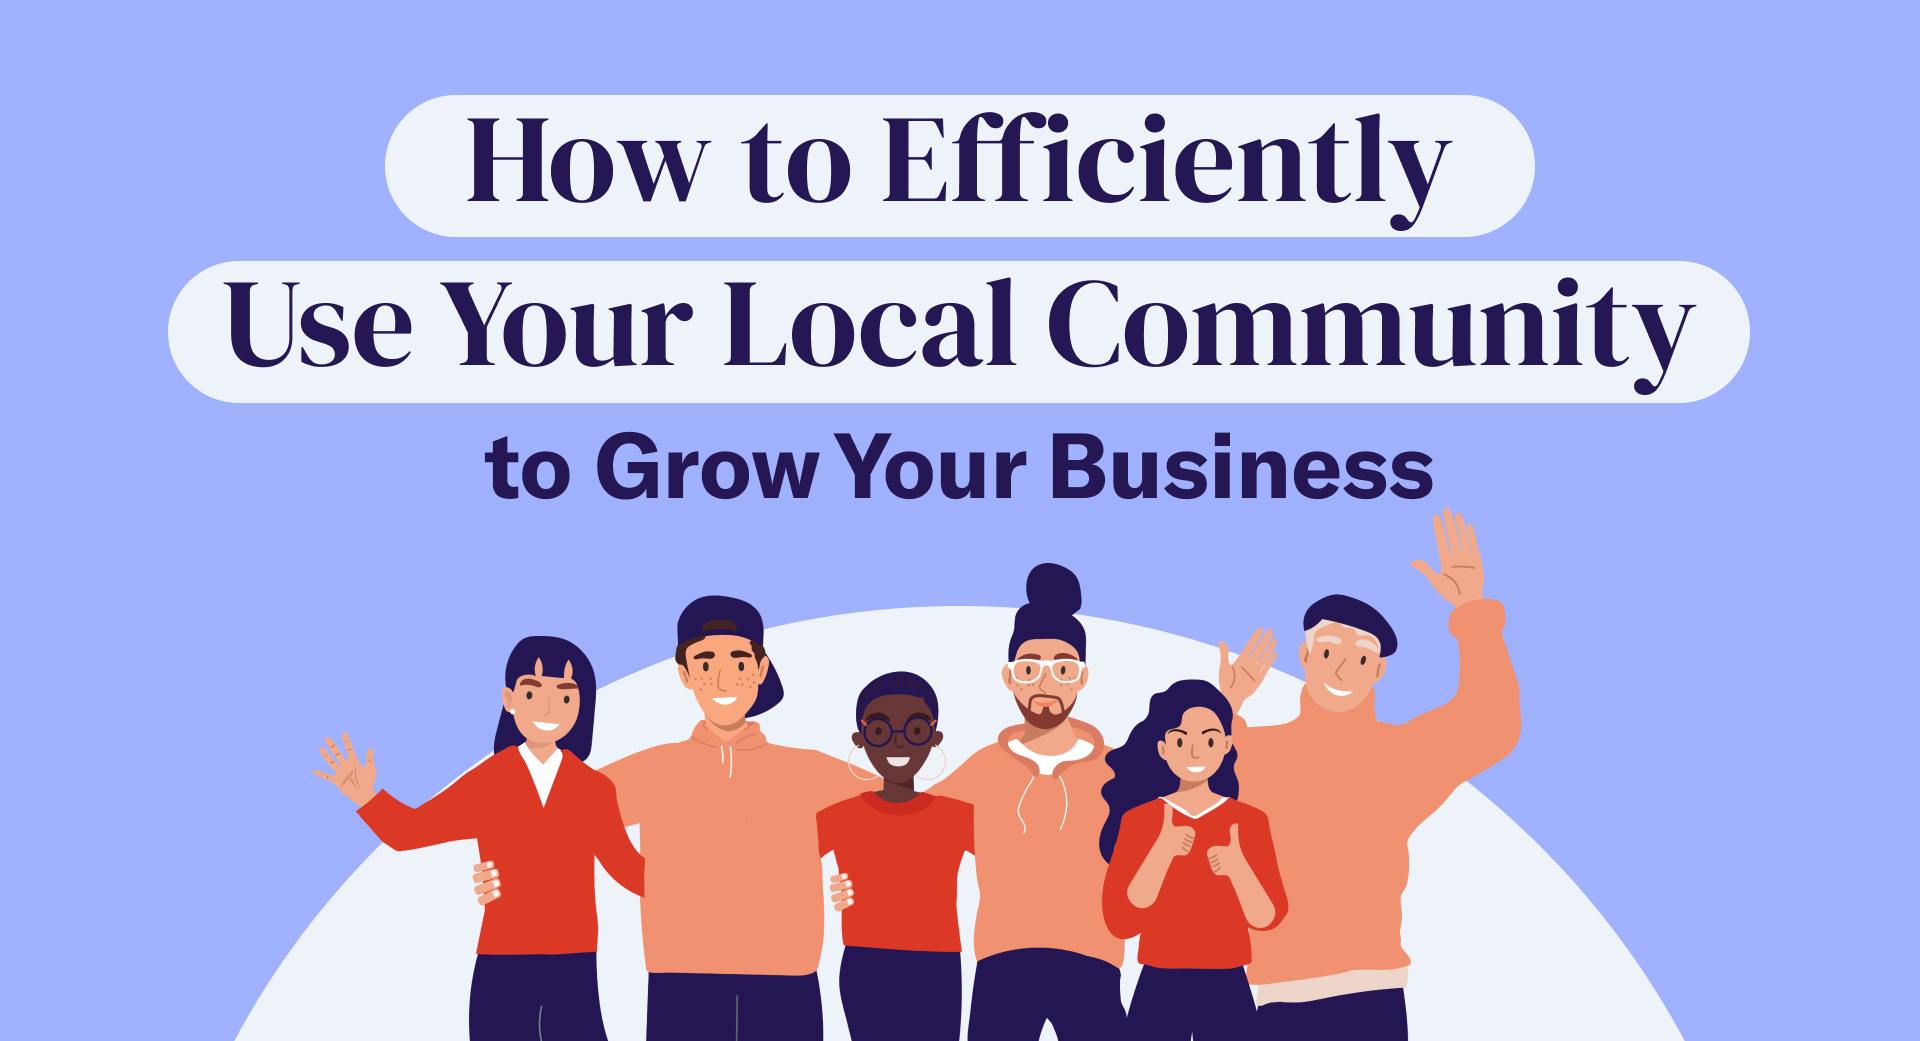 How to Efficiently Use Your Local Community to Grow Your Business